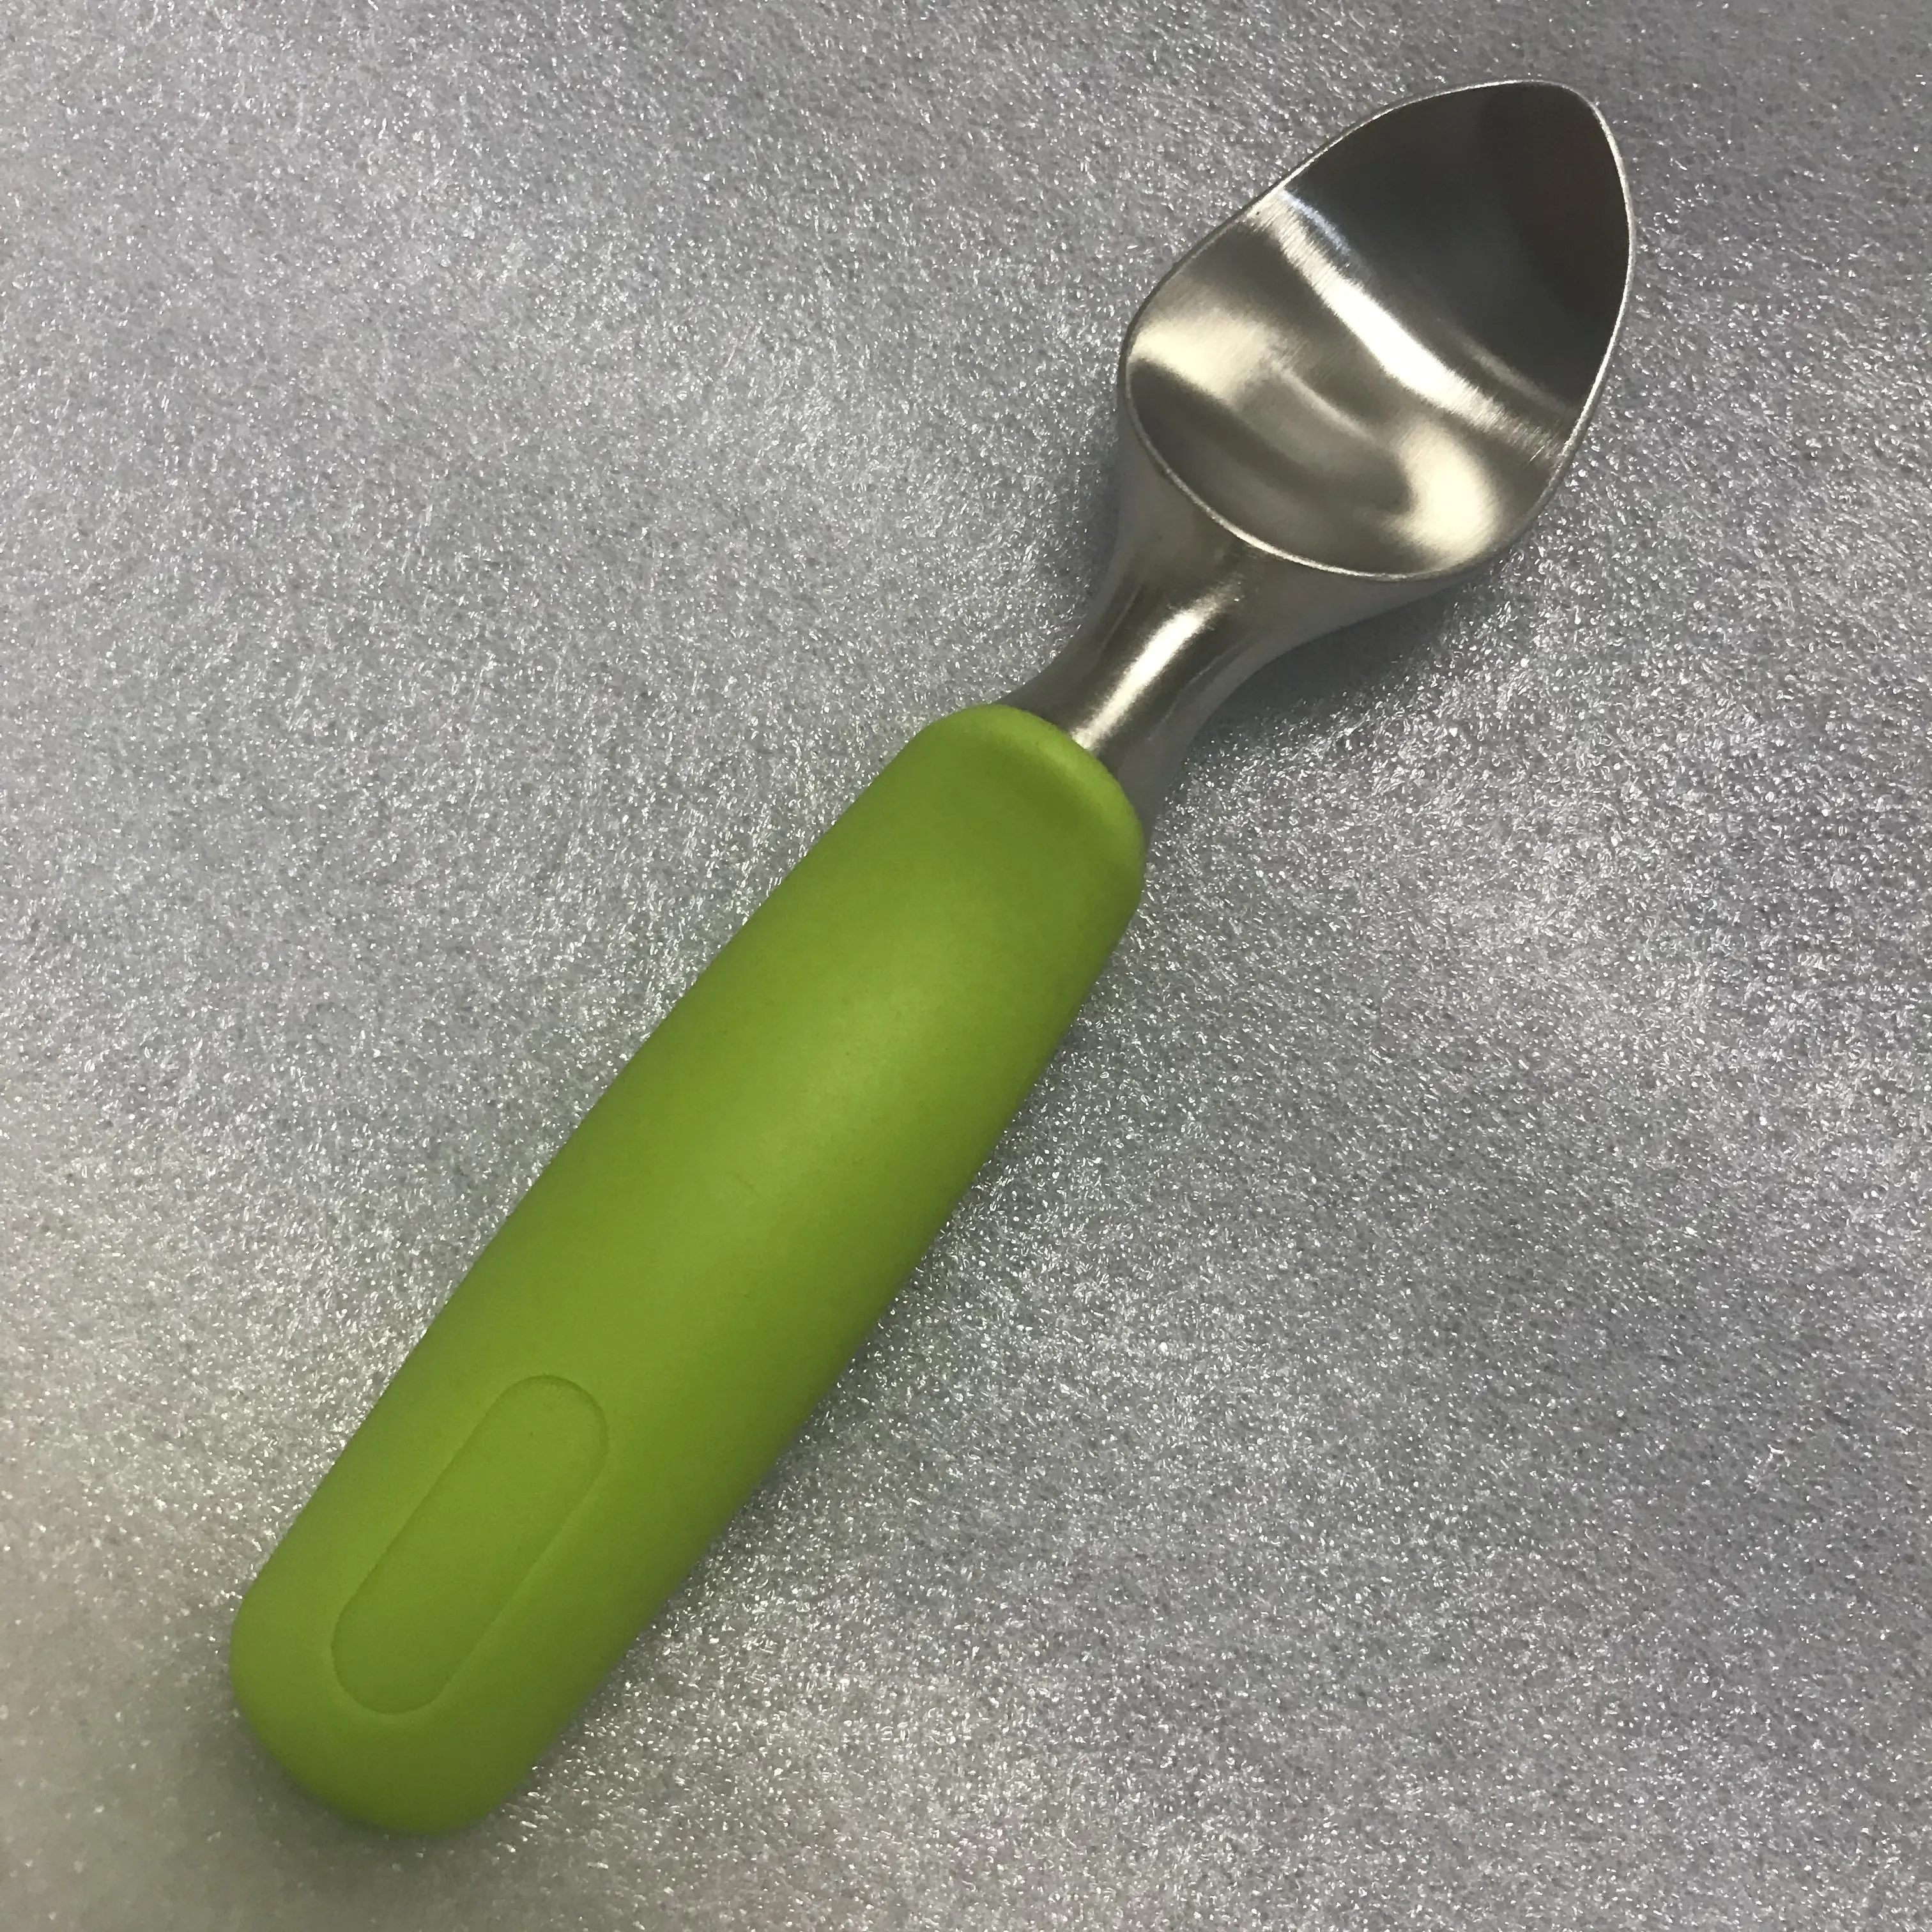 Professional Stainless Steel Ice Cream Scoop.Dishwasher Safe.